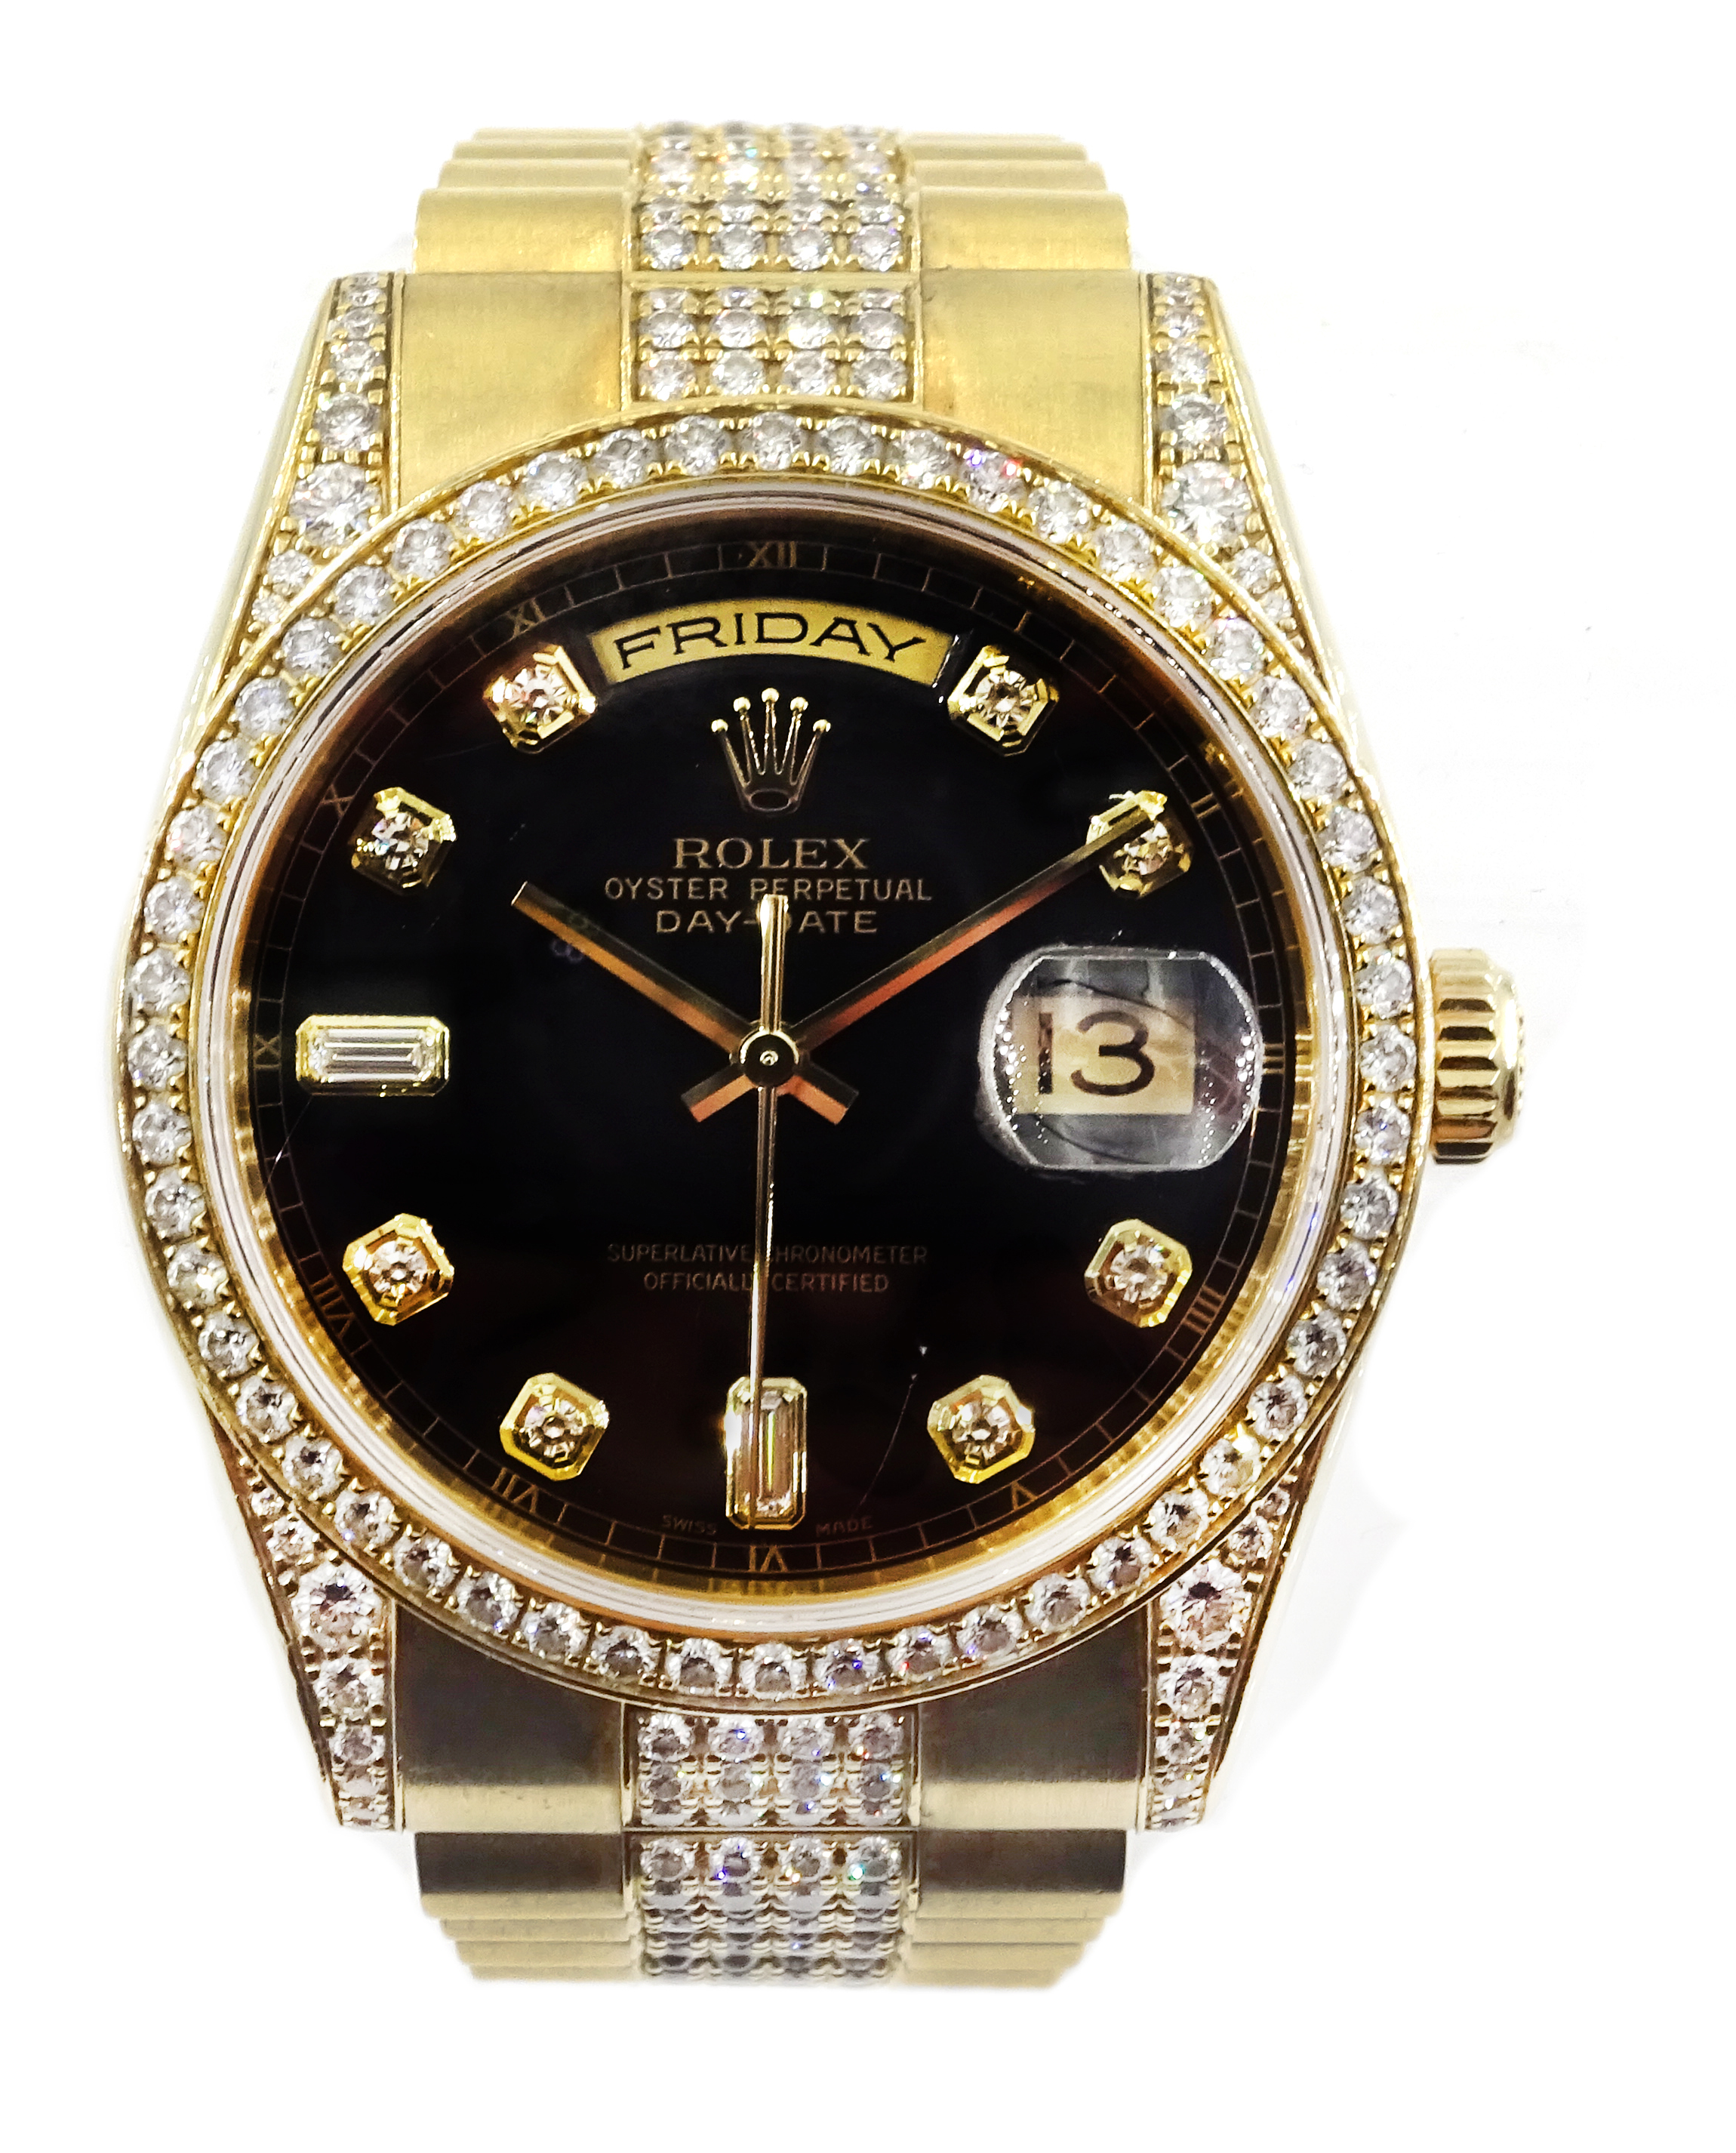 Rolex Oyster Perpetual Day-Date gentleman's 18ct gold diamond set automatic wristwatch,